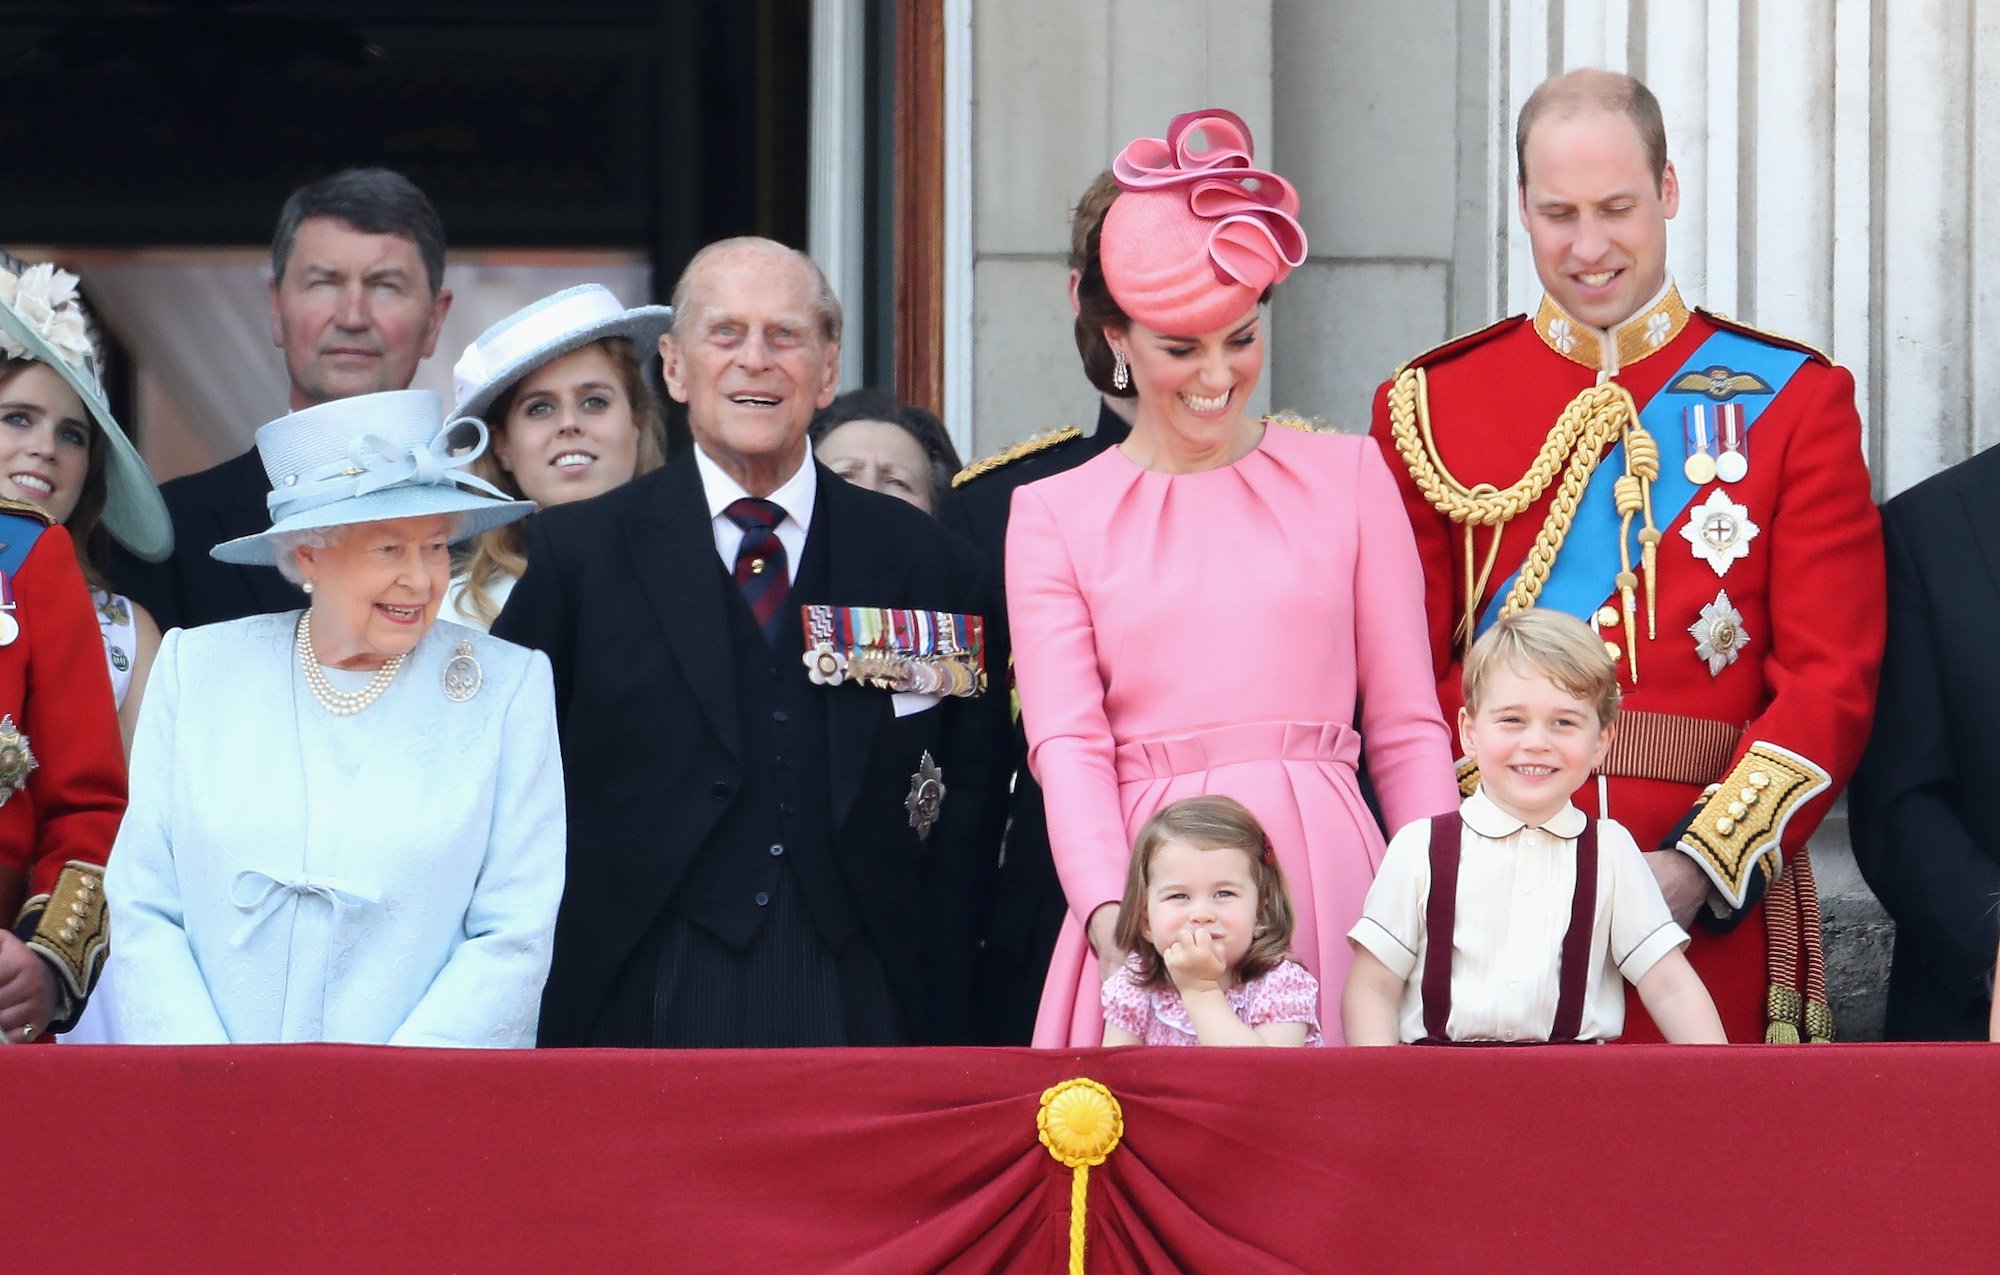 (L-R) Queen Elizabeth, Prince Philip, Kate Middleton, Prince William (Front, L-R) Princess Charlotte and Prince George smiling